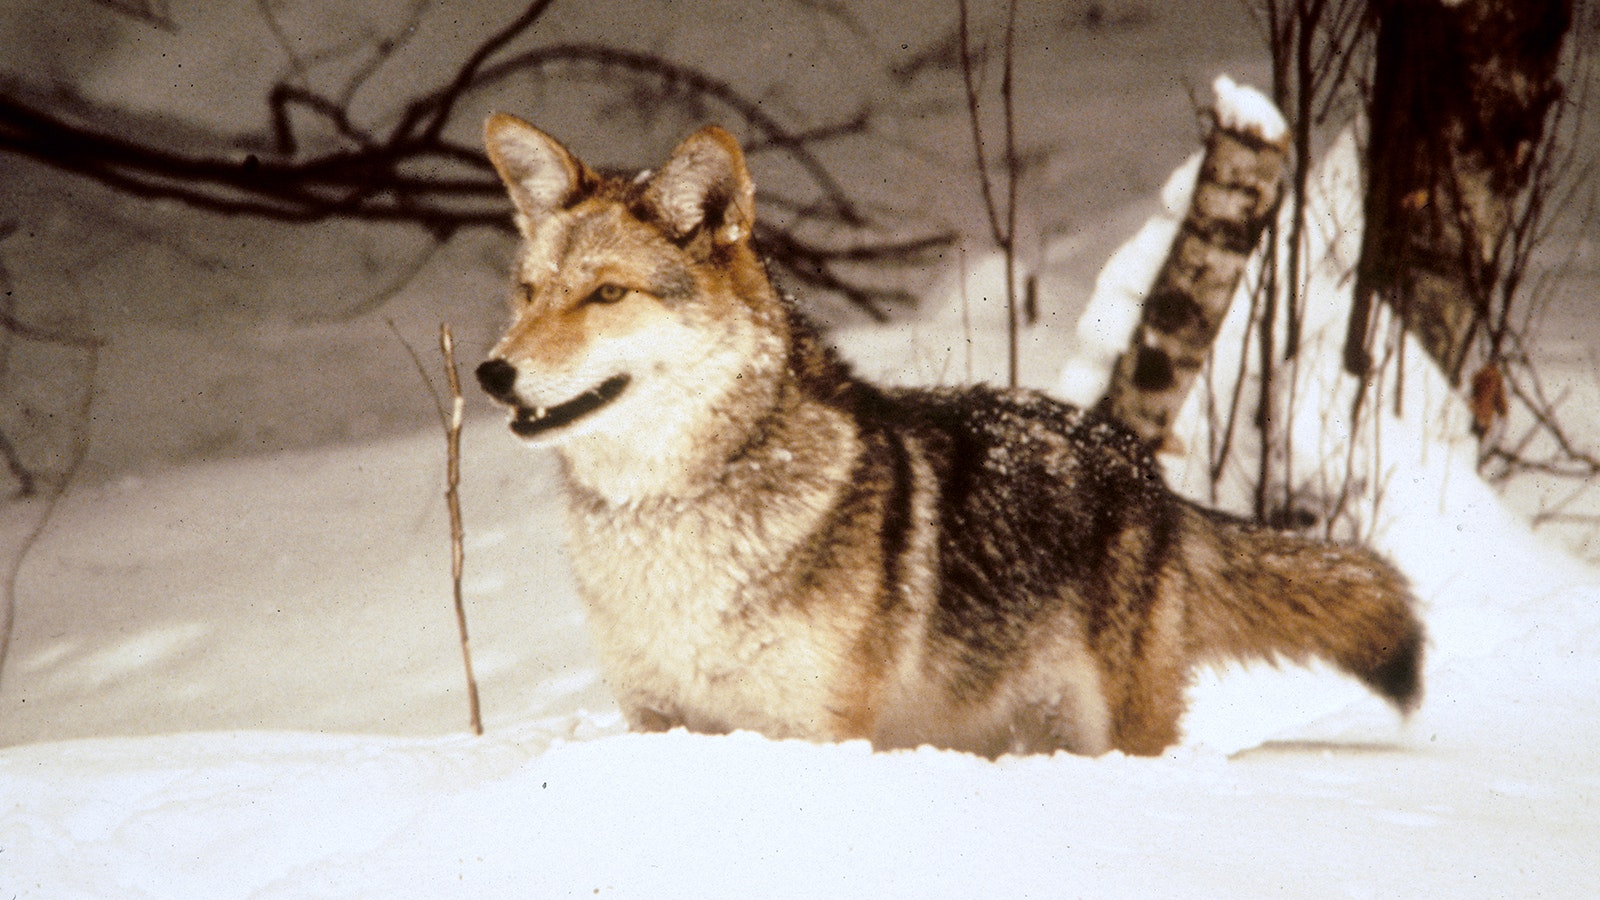 Eastern coyotes, commonly called “coywolves,” have mixed DNA from coyotes, wolves and sometimes even domestic dogs. They’re larger than Wyoming coyotes.